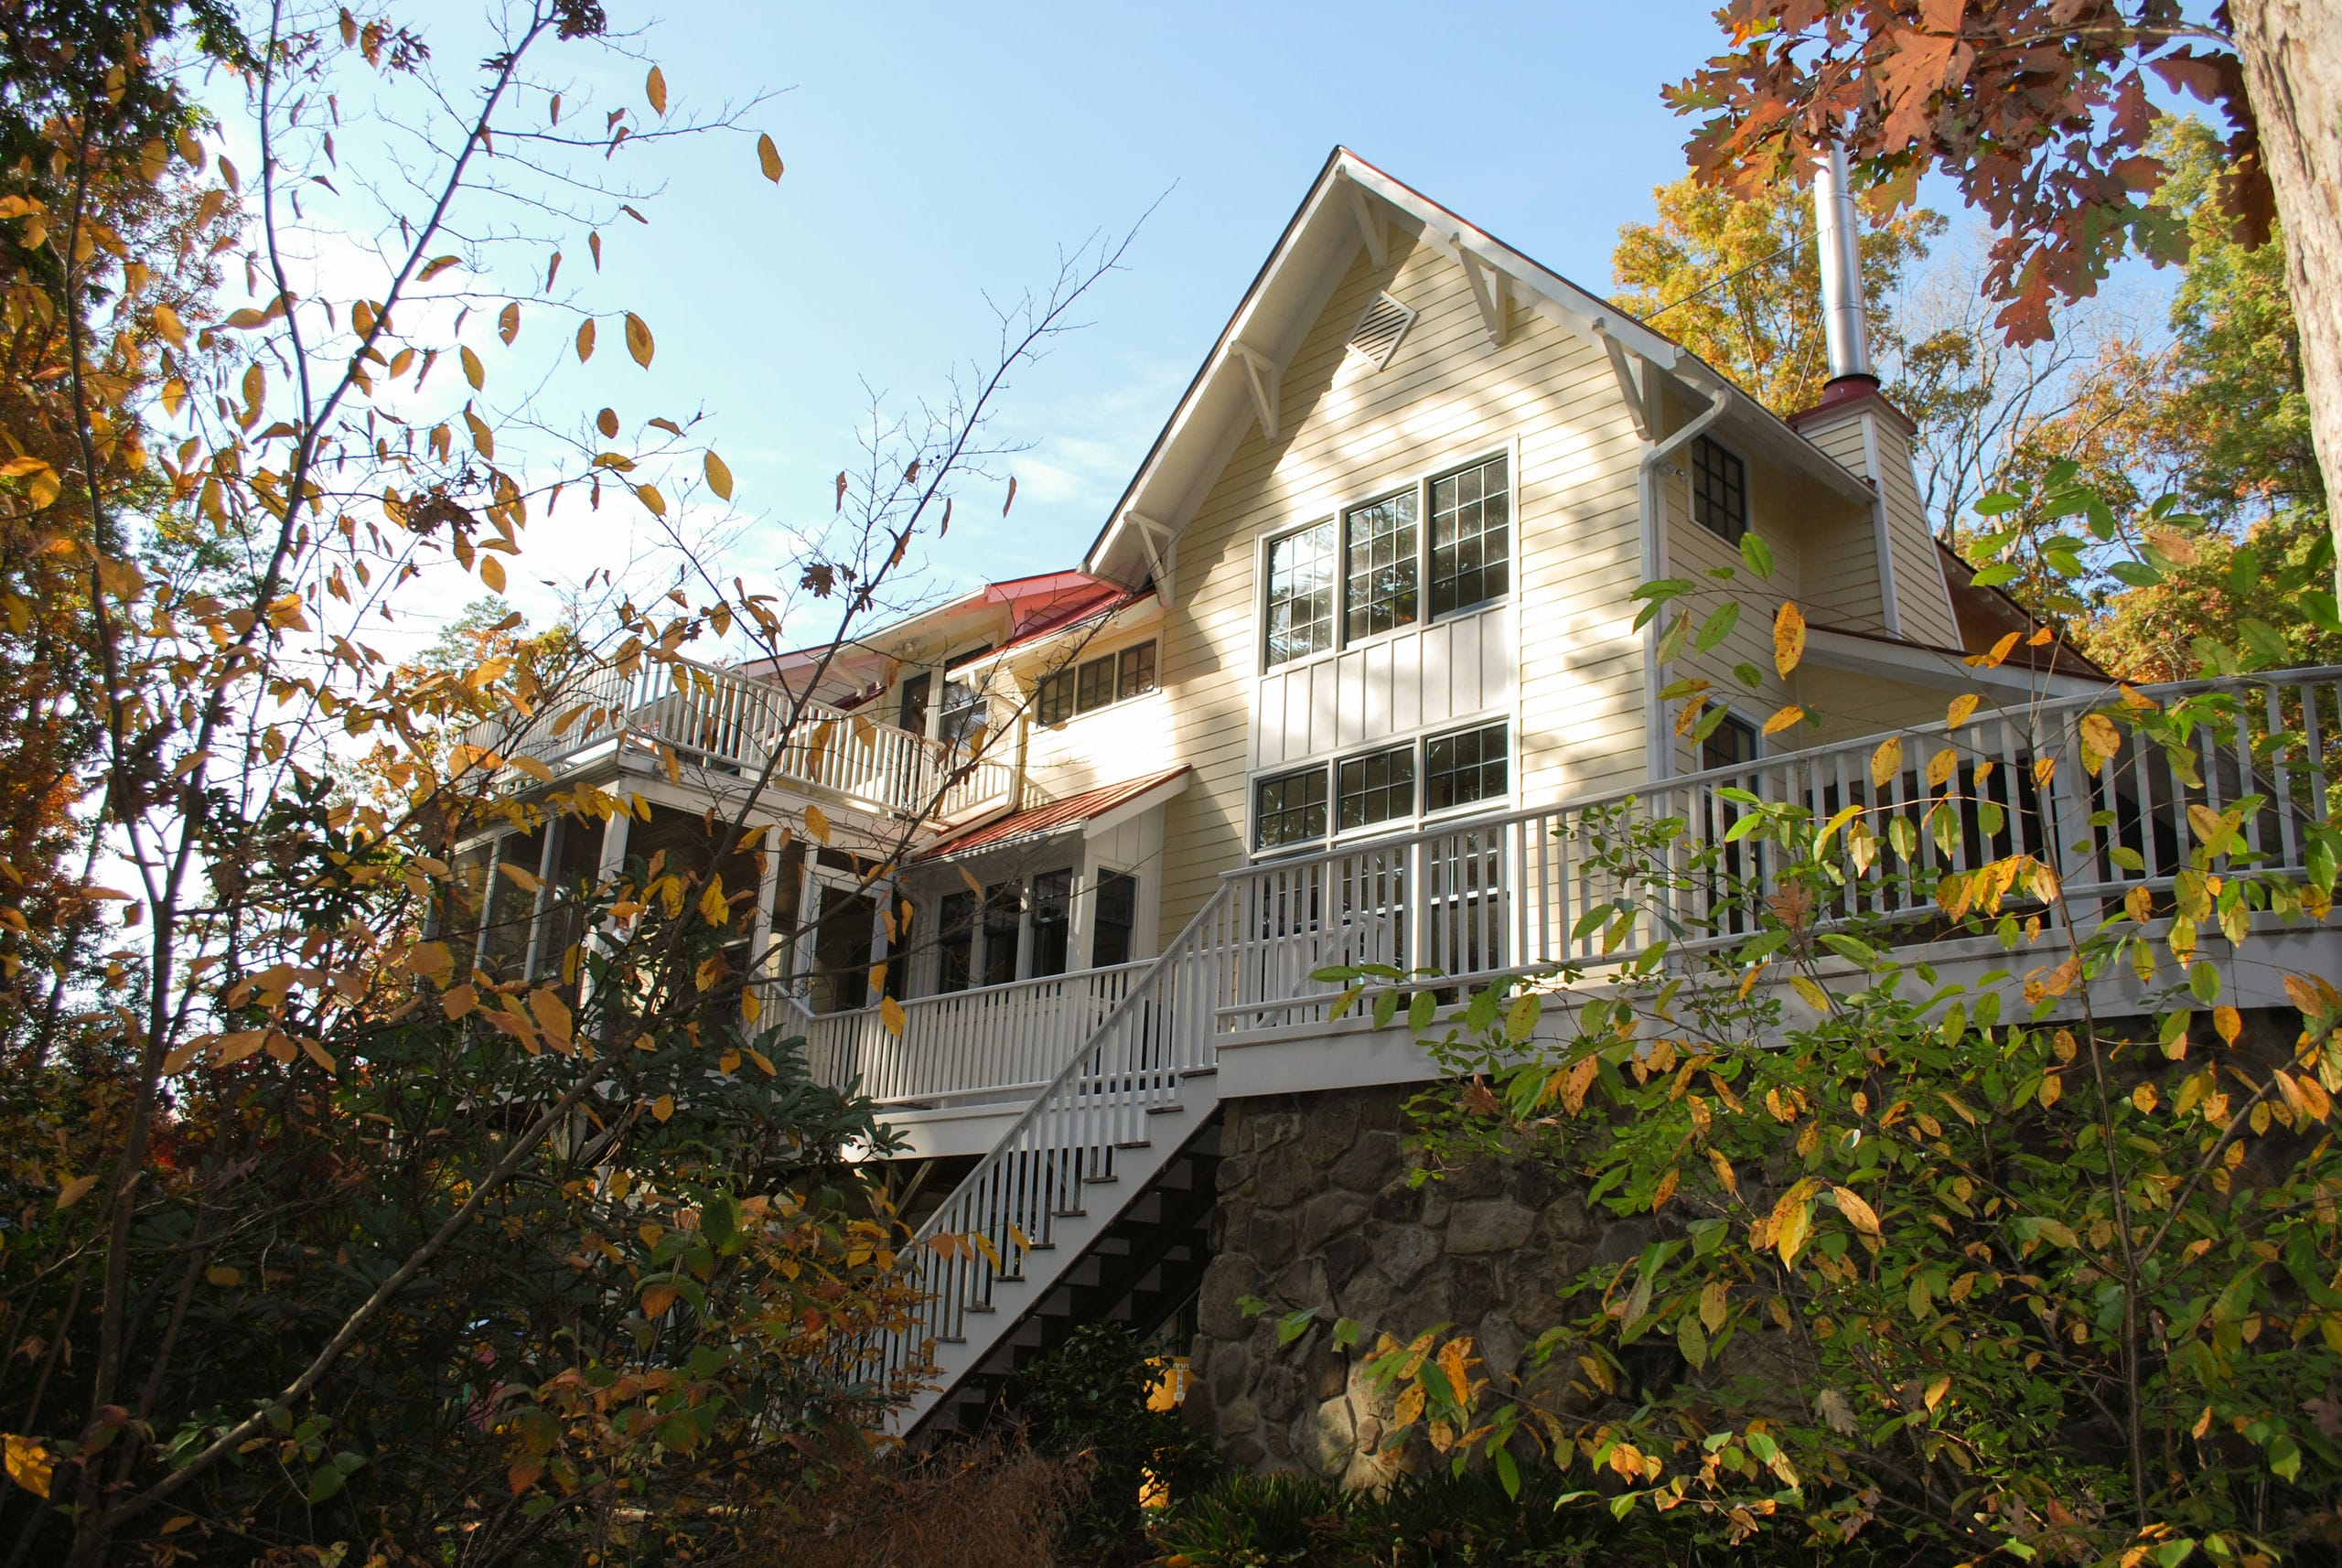 An exterior view of the house in autumn. Colorful leaves compliment the soft yellow siding, white window trim and unique red standing-seam metal roof.